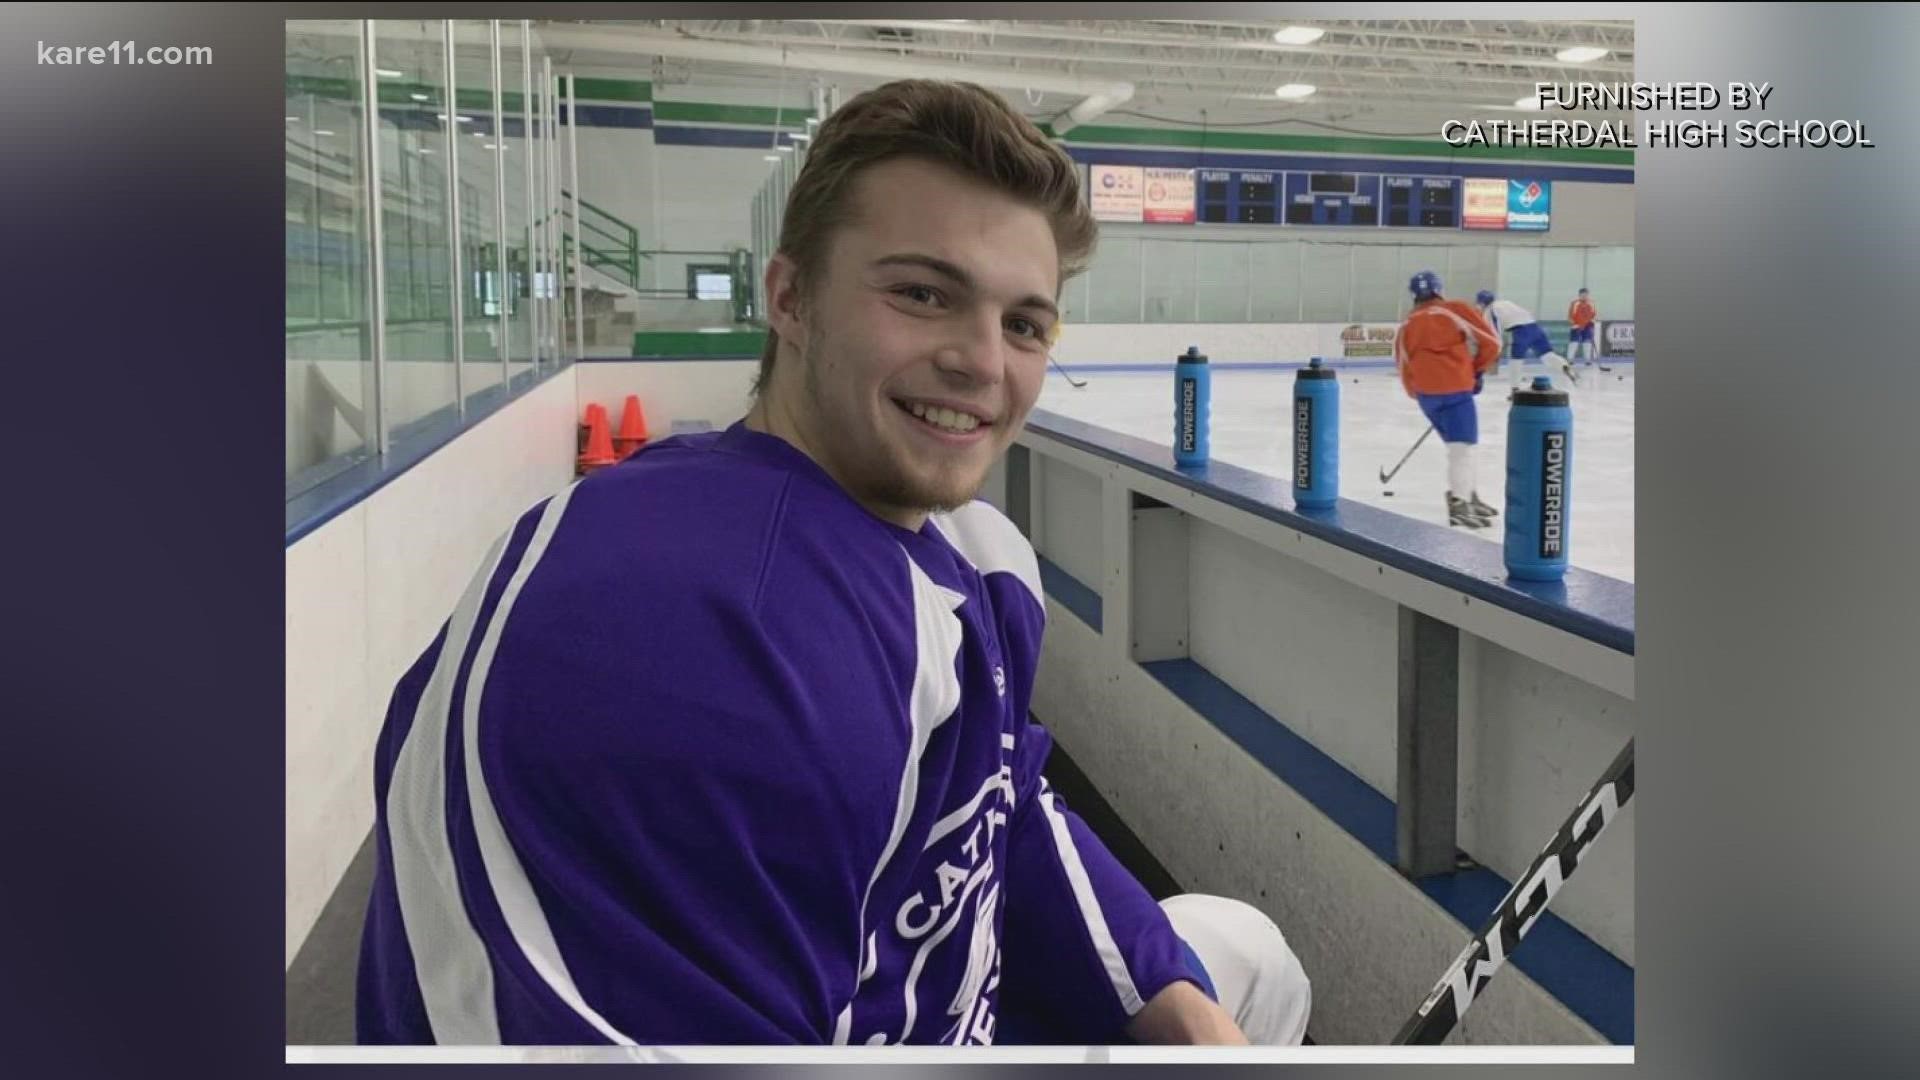 The 20-year-old hockey player was killed while riding with a suspected drunk driver on Saturday, July 24 near Orono.